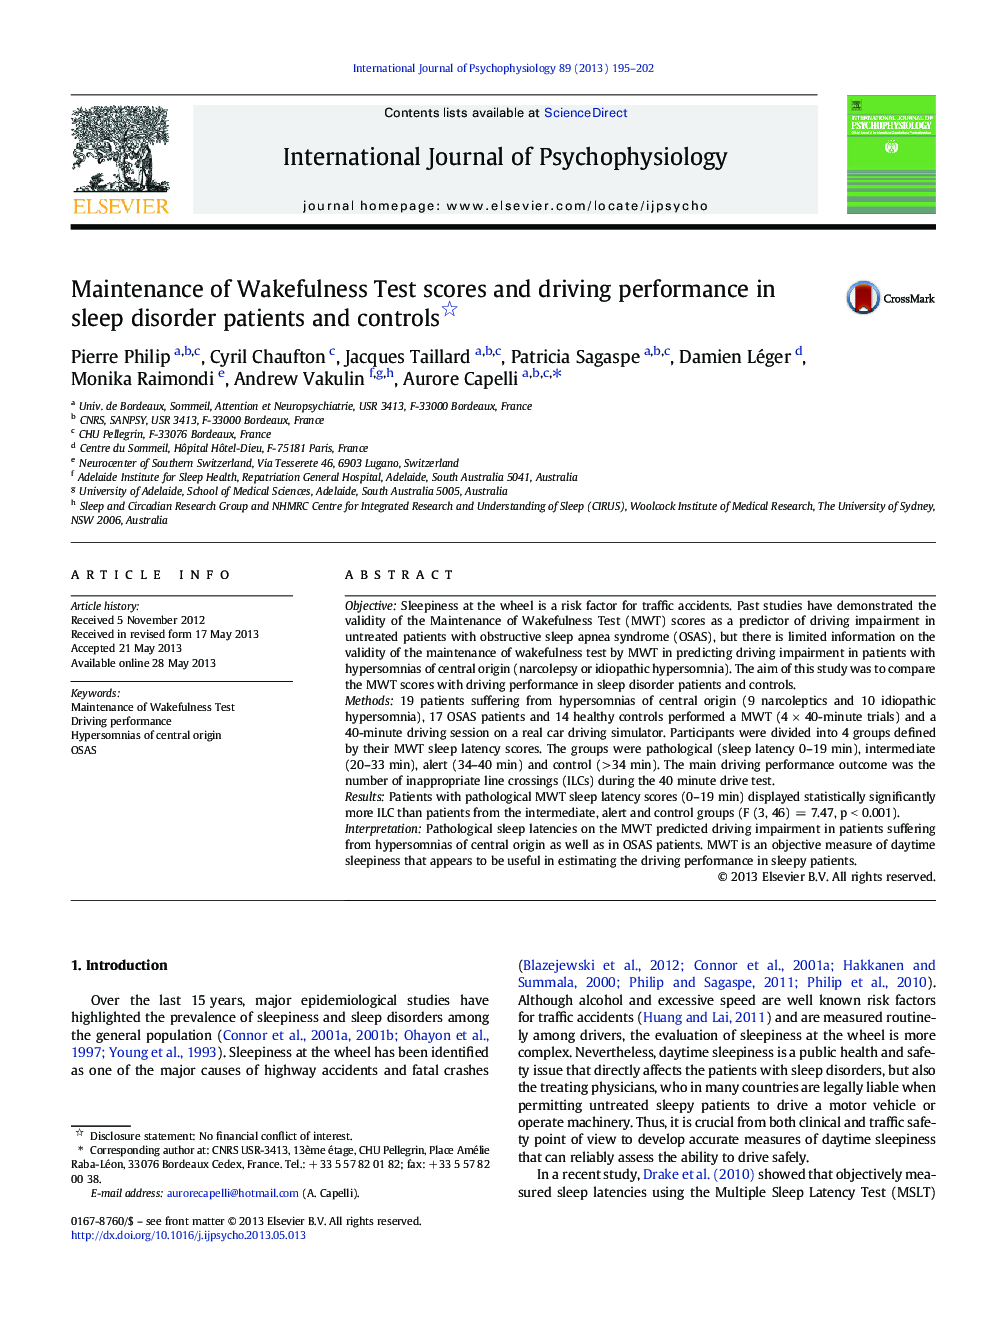 Maintenance of Wakefulness Test scores and driving performance in sleep disorder patients and controls 